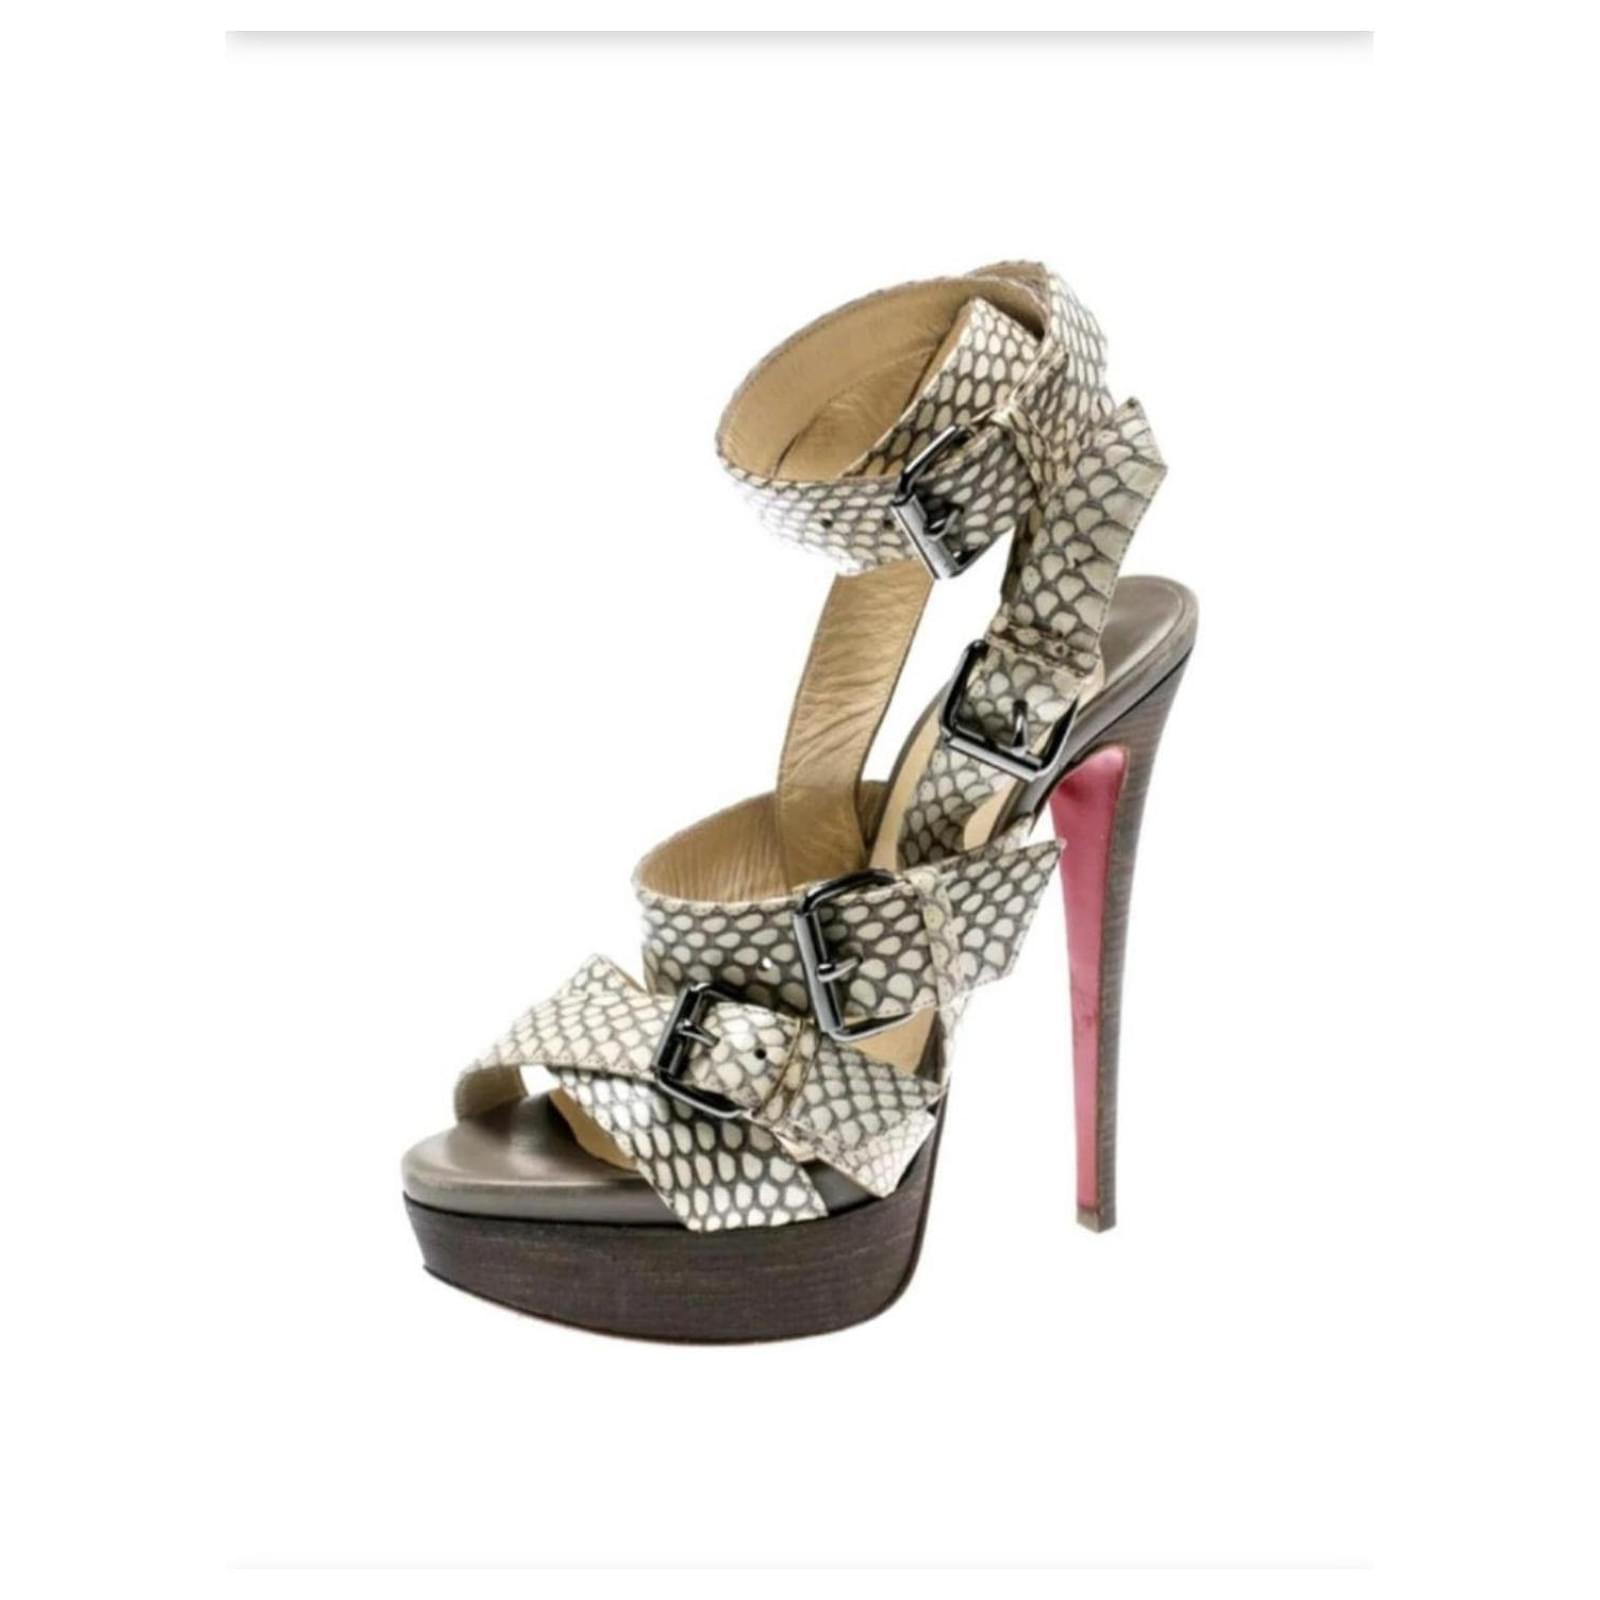 Christian Louboutin Inflama Sab 85 Leather Heeled Sandals in Green